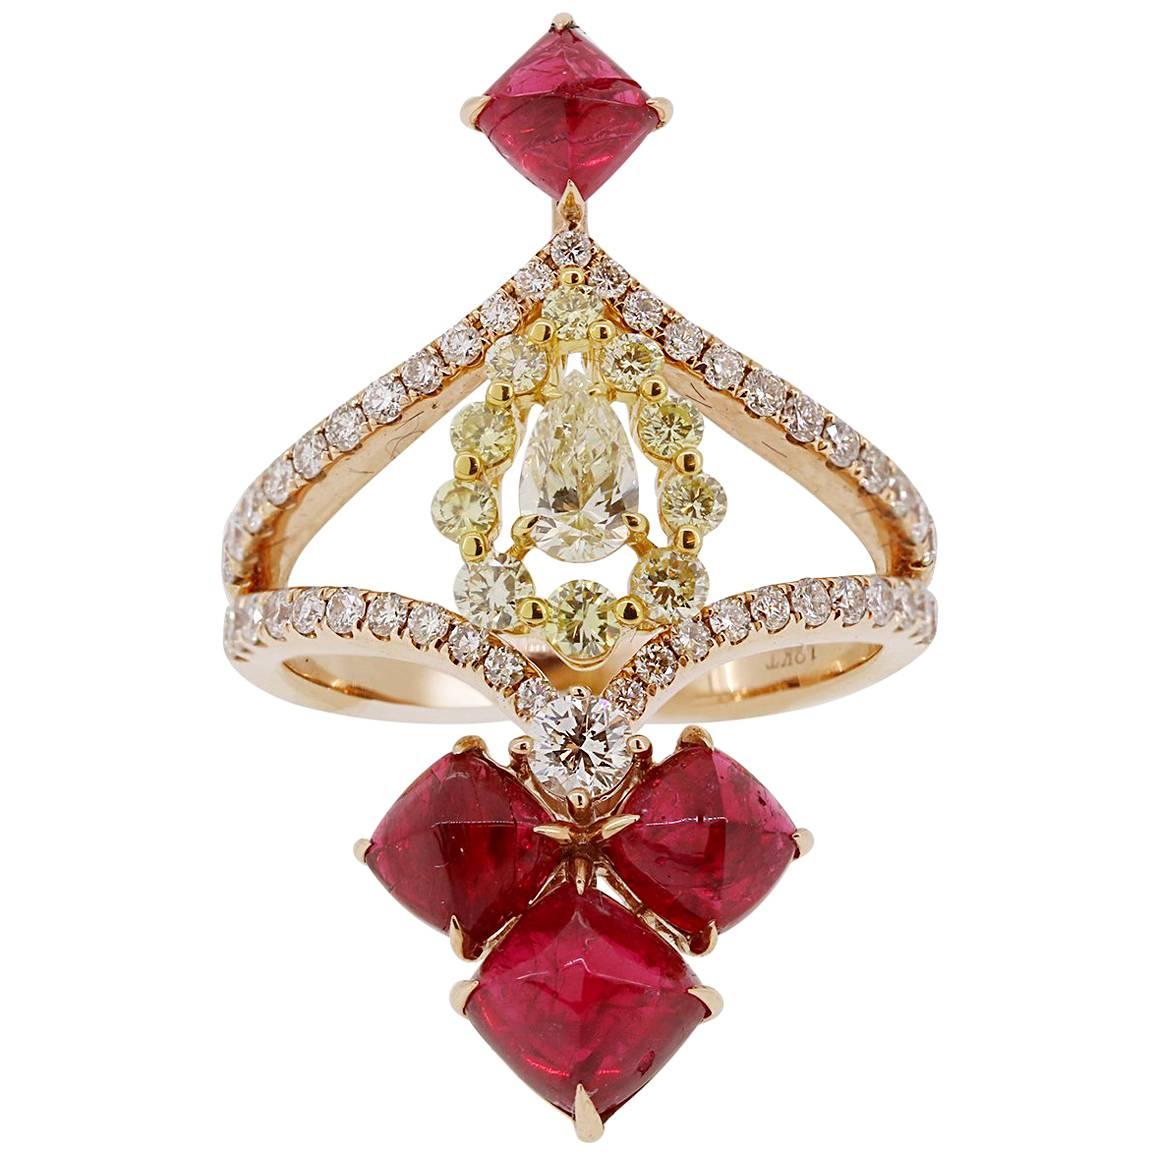 Red Spinel Yellow Diamond Ring